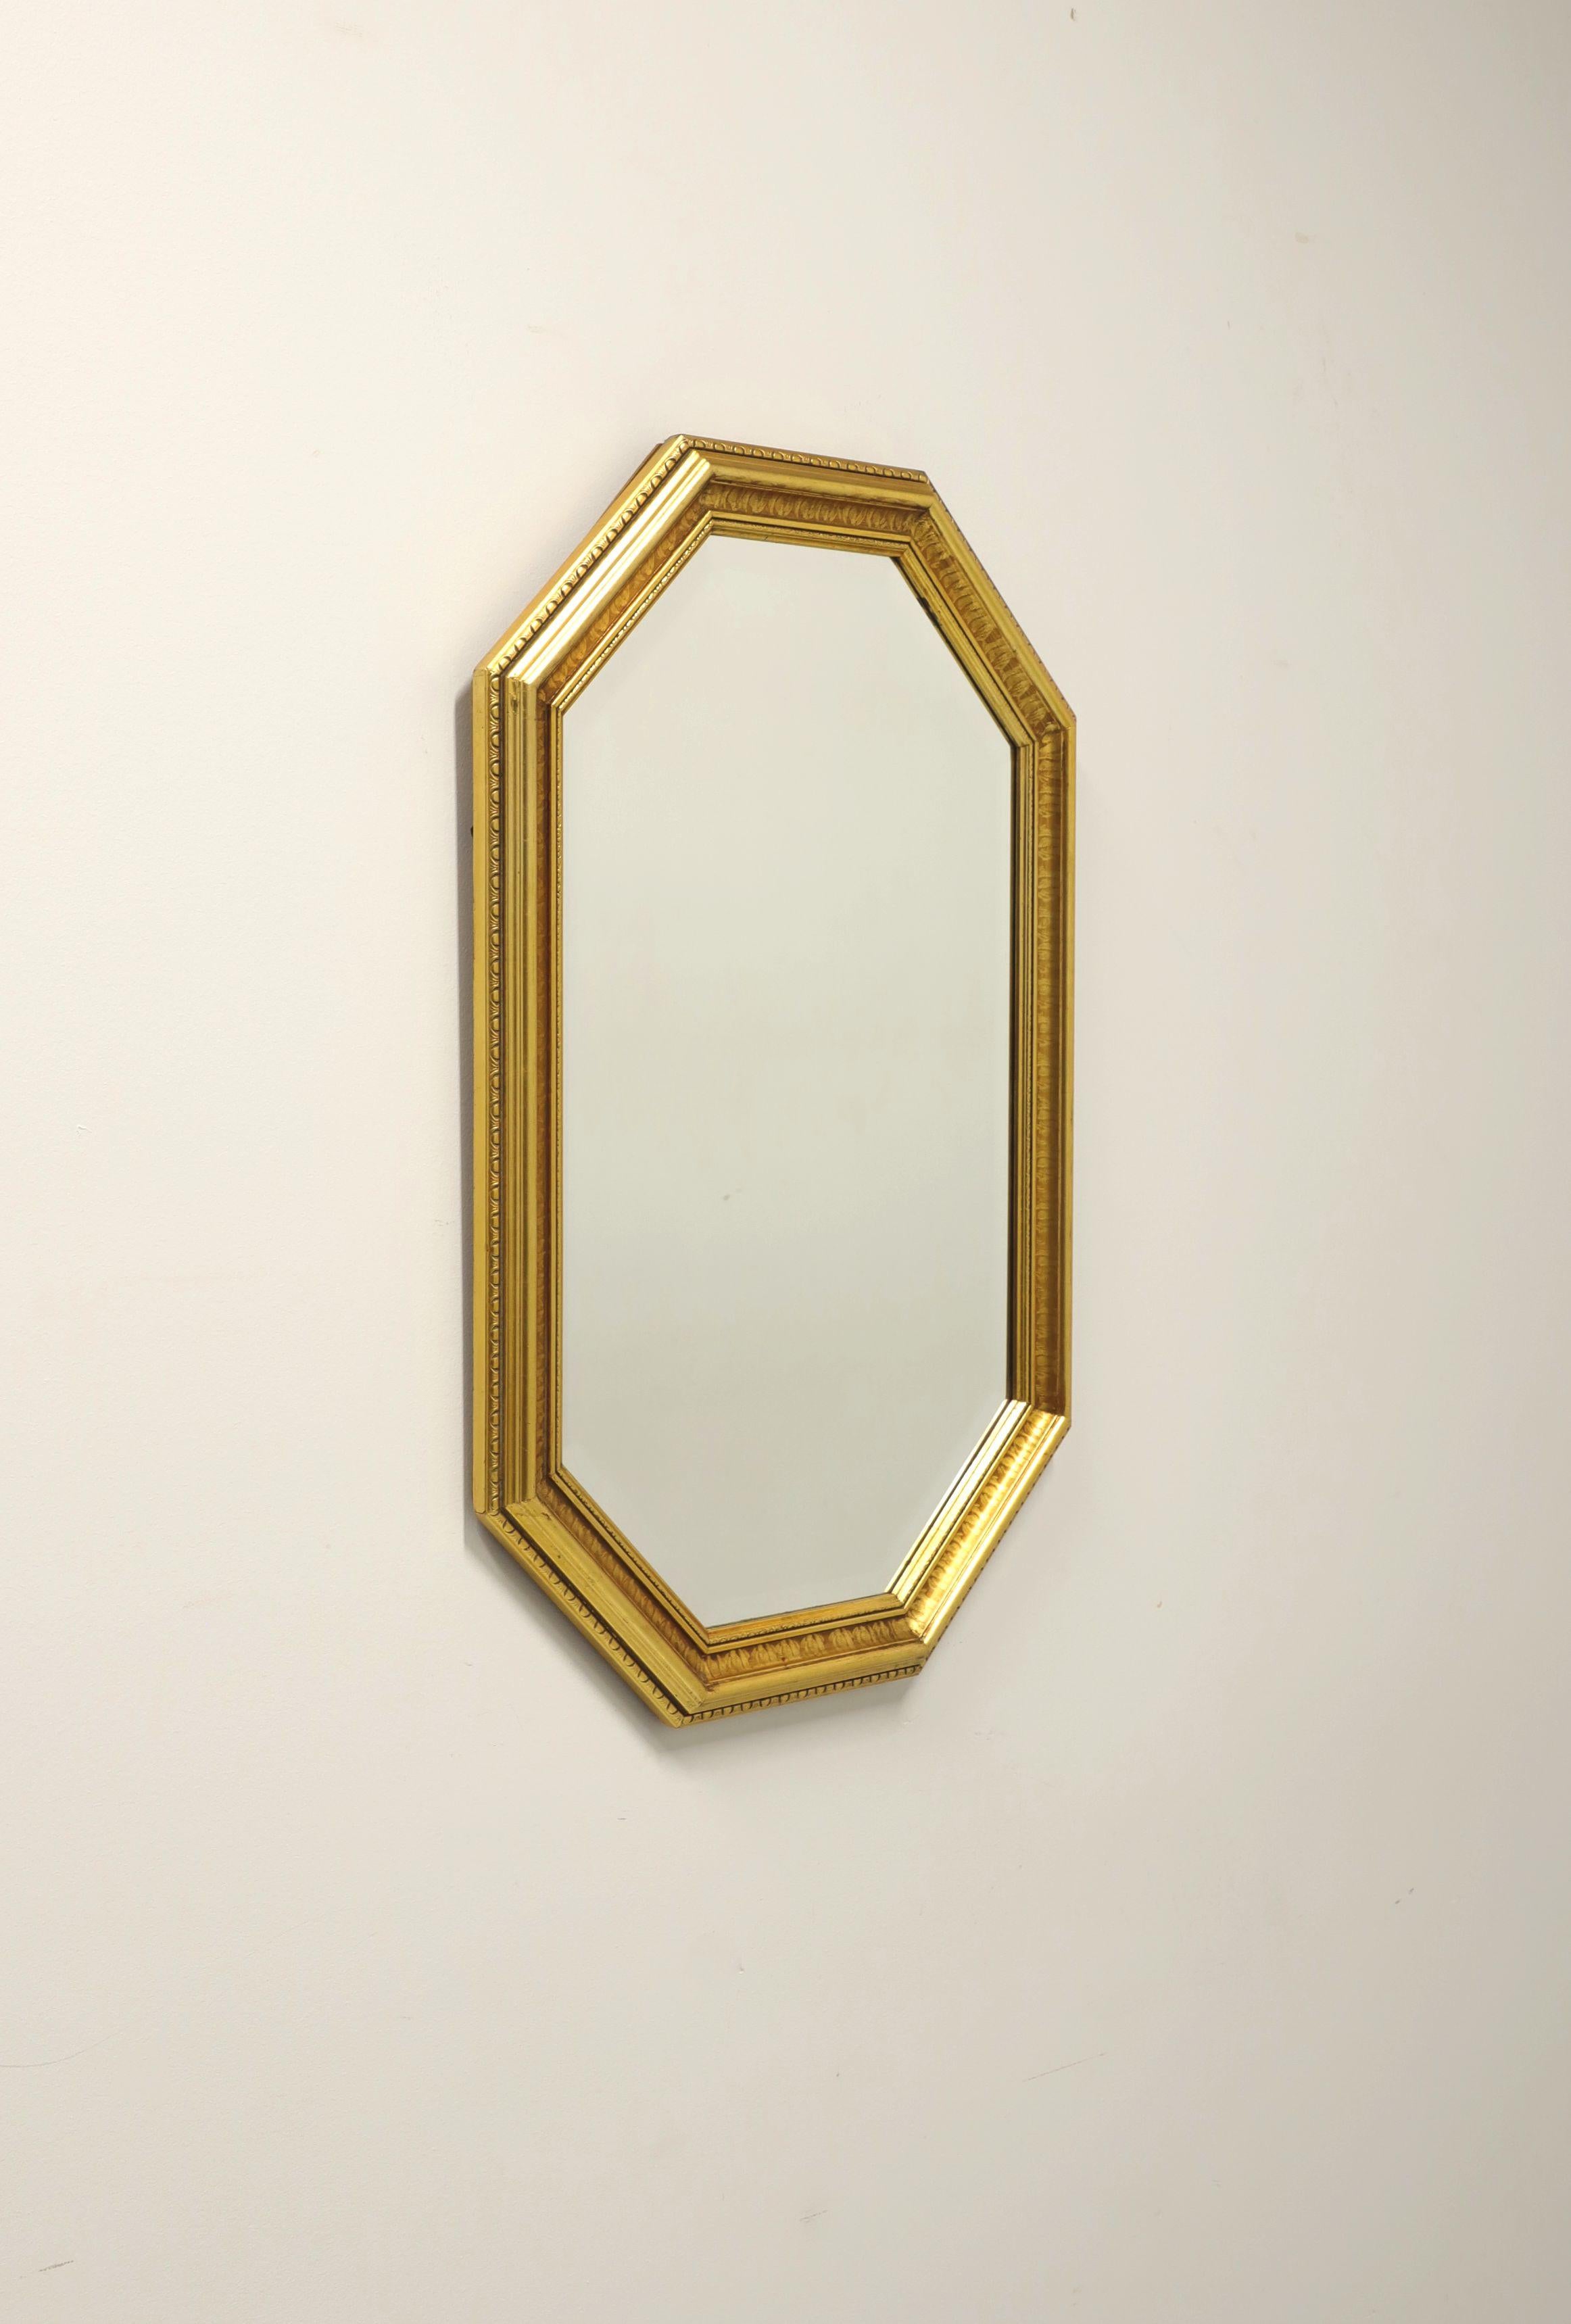 A Traditional style wall mirror by Carolina Mirror. Beveled mirror glass and gold painted solid wood frame. Features an octagonal shape with decorative detail to frame. Made in North Carolina, USA, in the late 20th Century.

Measures: 31 W 1 D 50.25